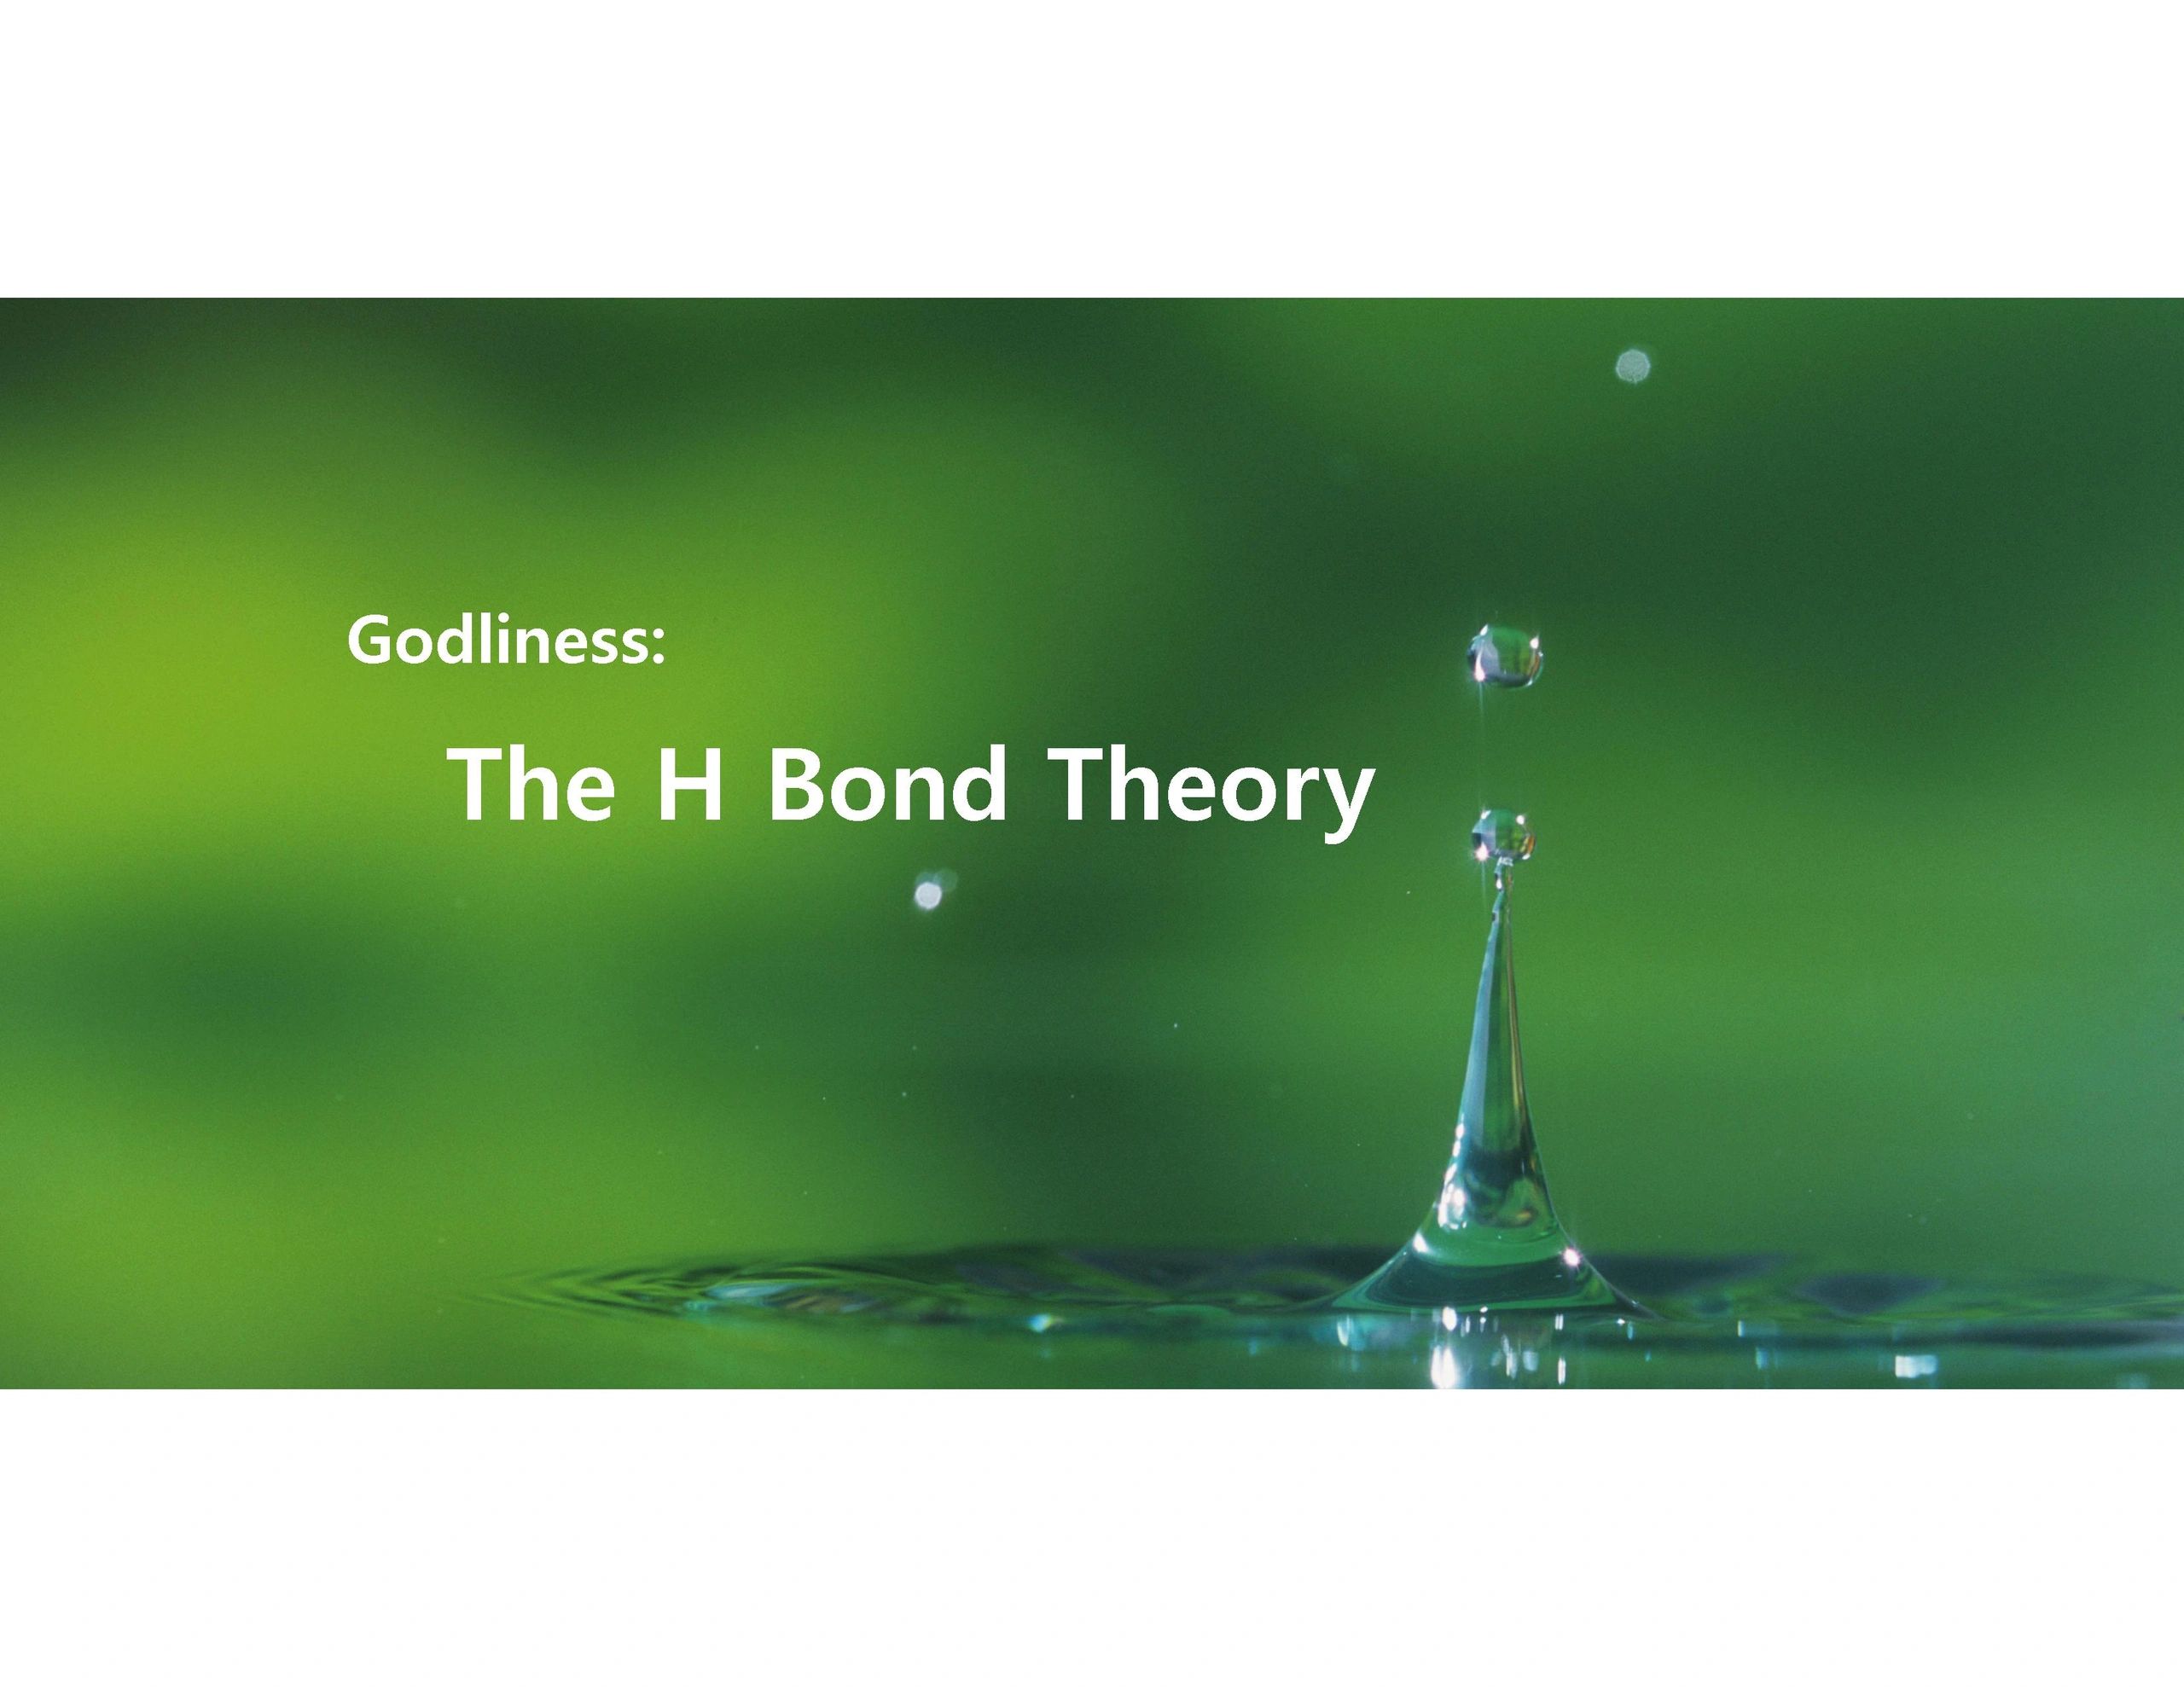 The H Bond Theory offers peace between faith and reason, between warring political factions.